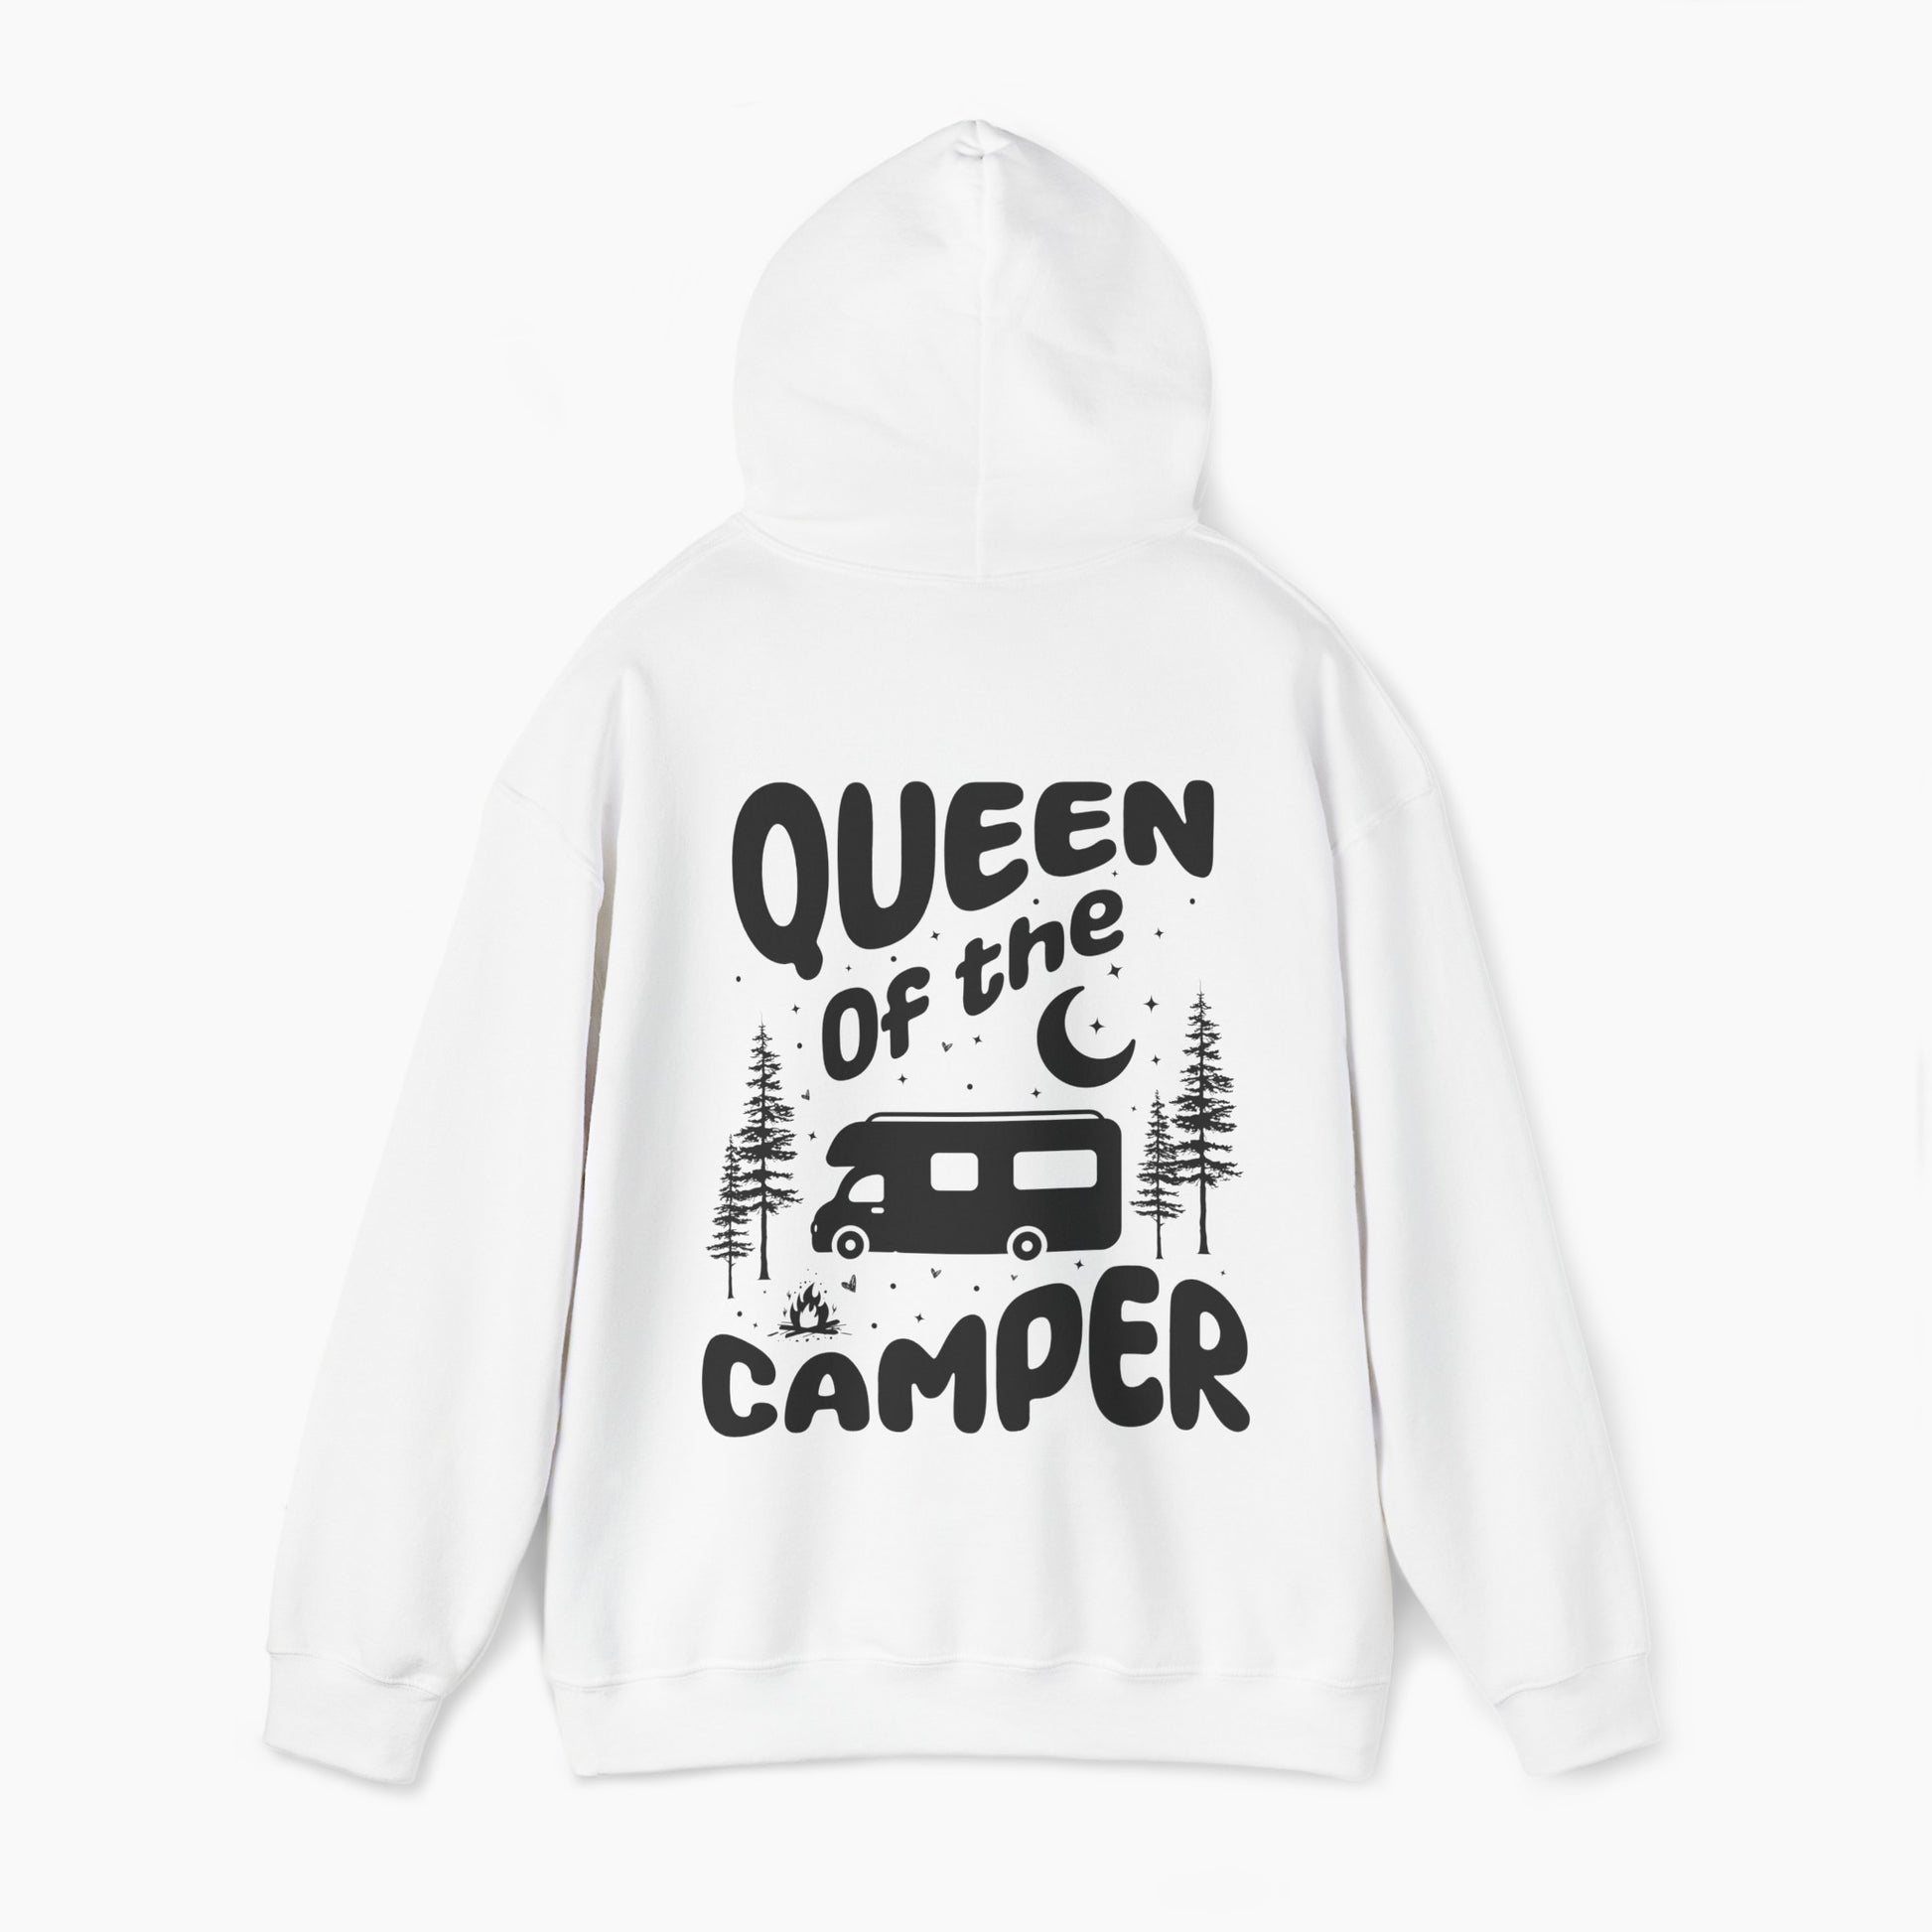 Back of a white hoodie with the text 'Queen of the Camper' surrounded by elements including a camping van, stars, trees, and a campfire, on a plain background.